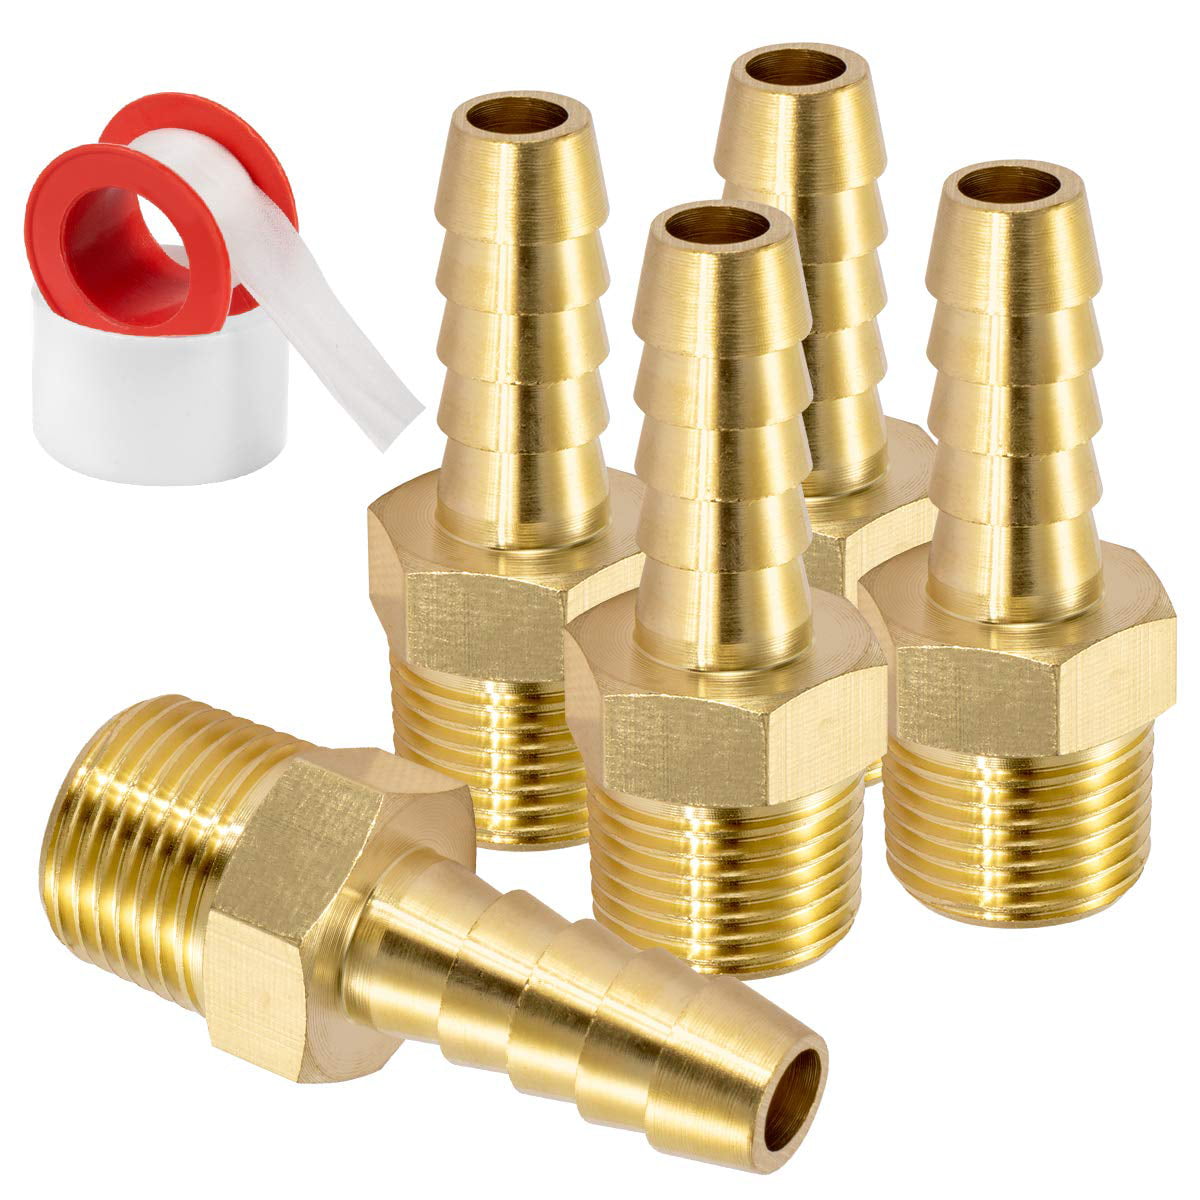 Air Hose Repair Kit 1/4" NPT 3/8" Line Solid Brass Barbed Connectors Hose Clamps 